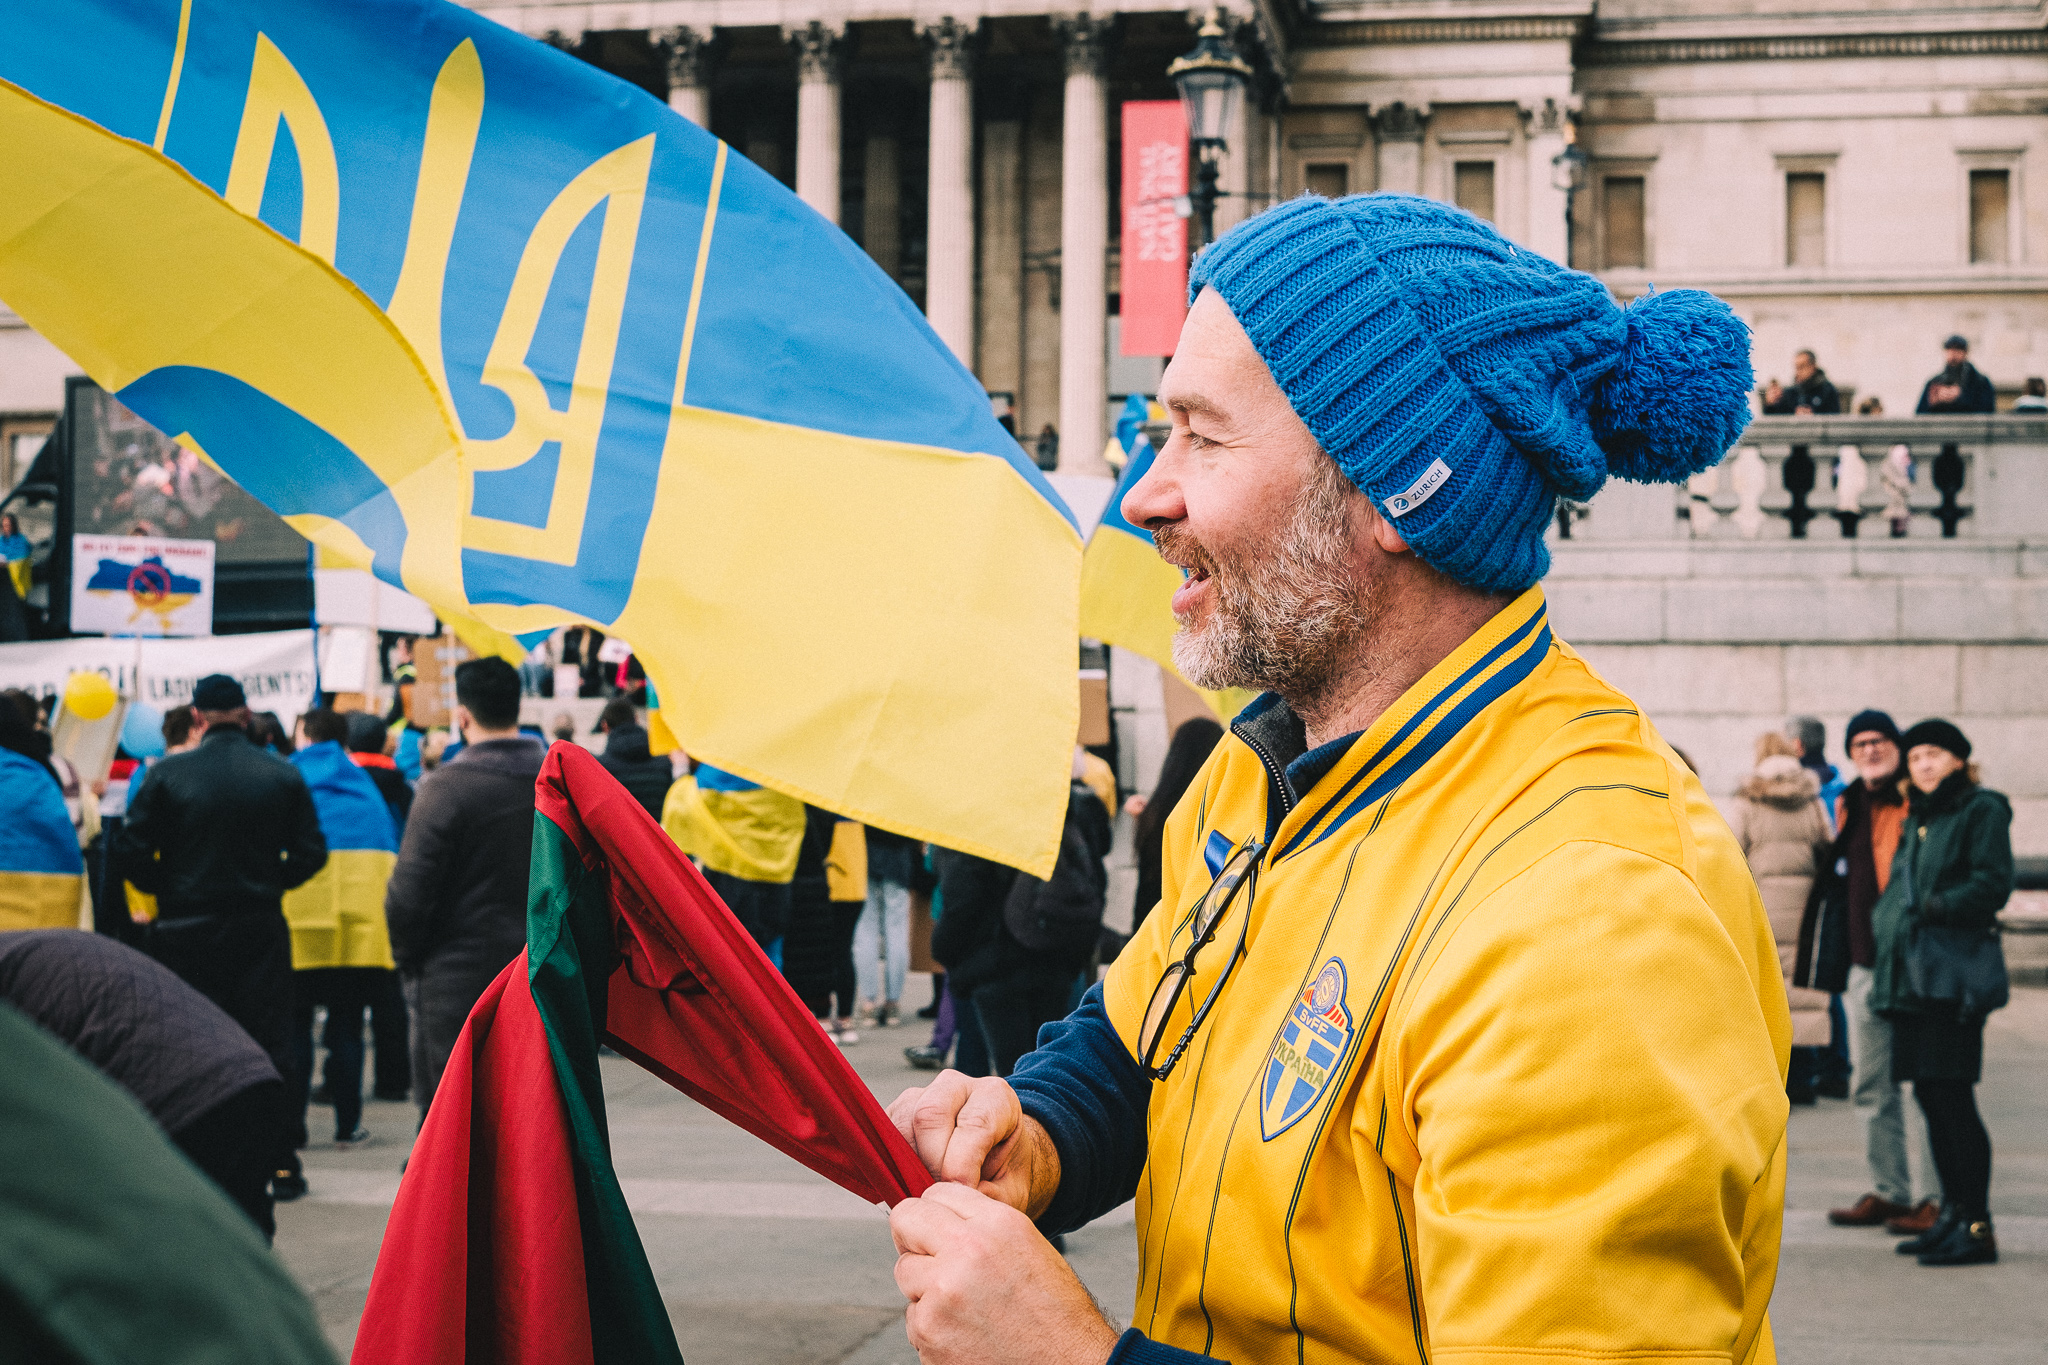 A protester putting up a flag at the rally to support Ukraine at Trafalgar Square wearing yellow top and a blue hat